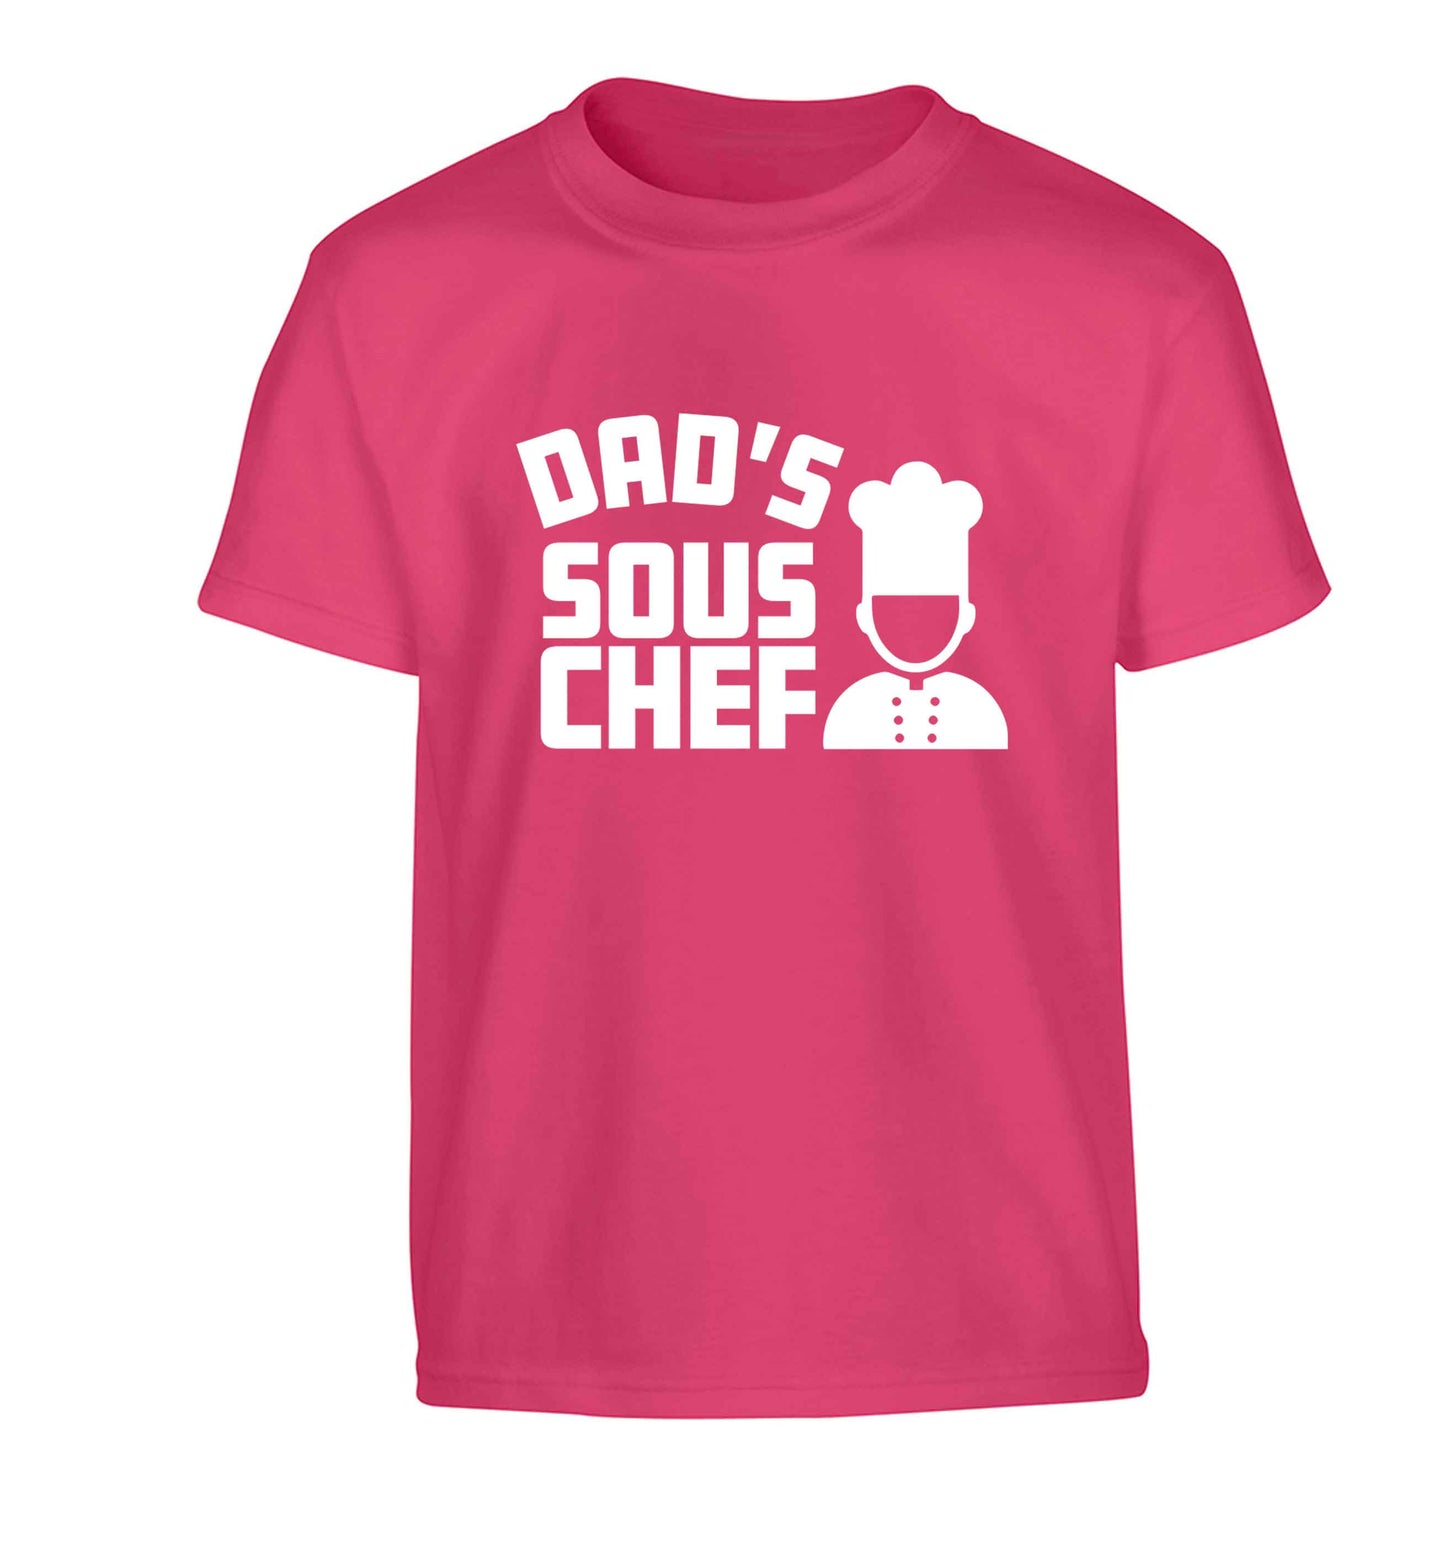 Dad's sous chef Children's pink Tshirt 12-13 Years